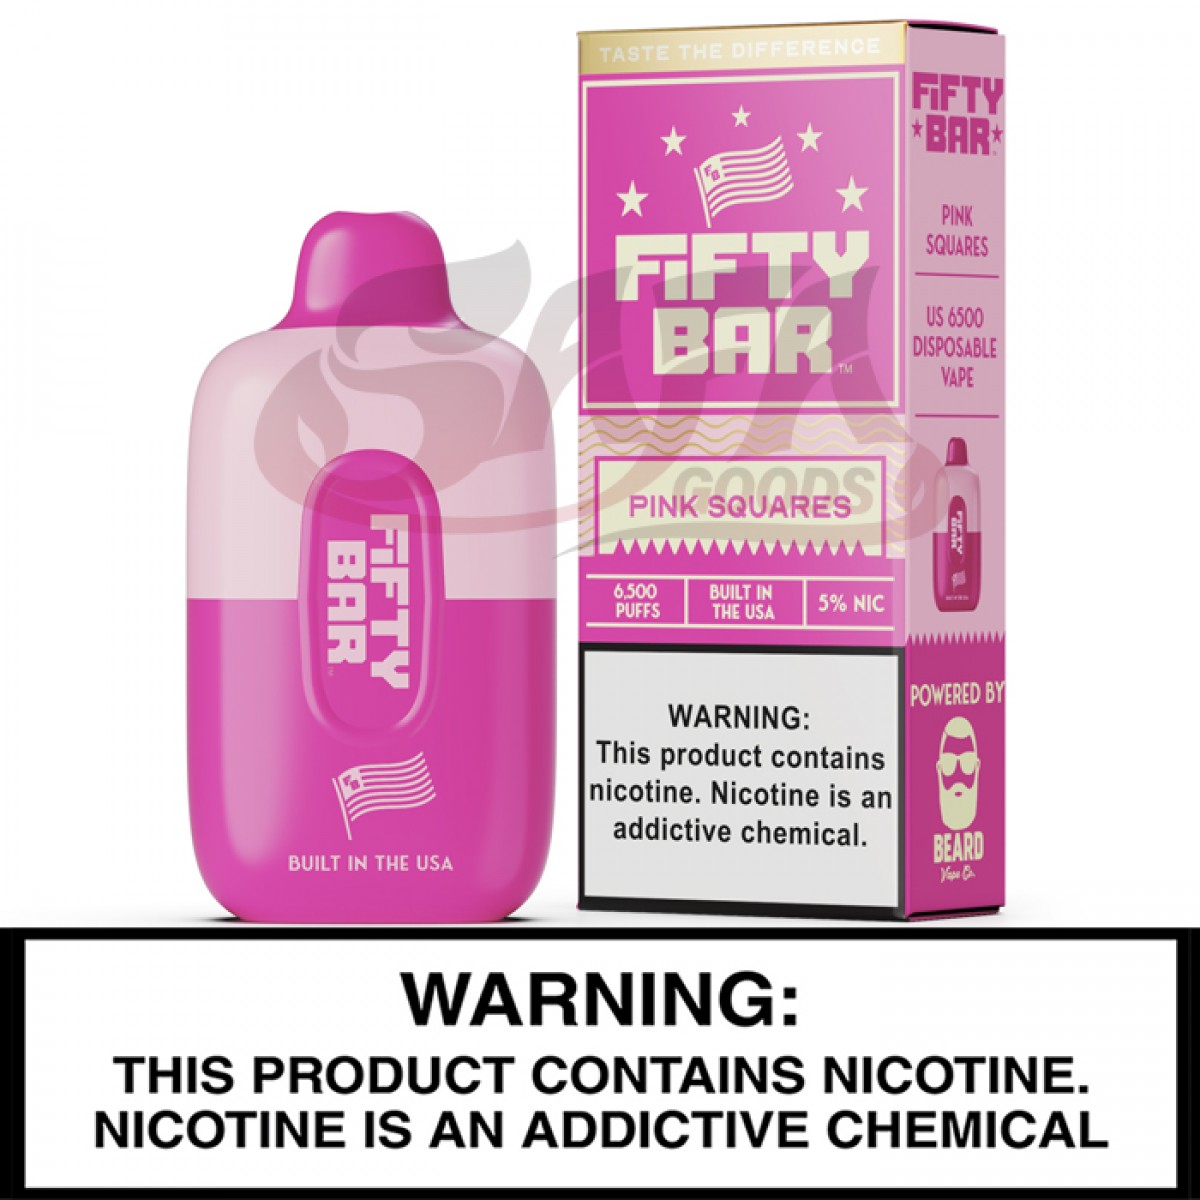 Fifty Bar - 6500 Puff Disposable Vapes [5PC]